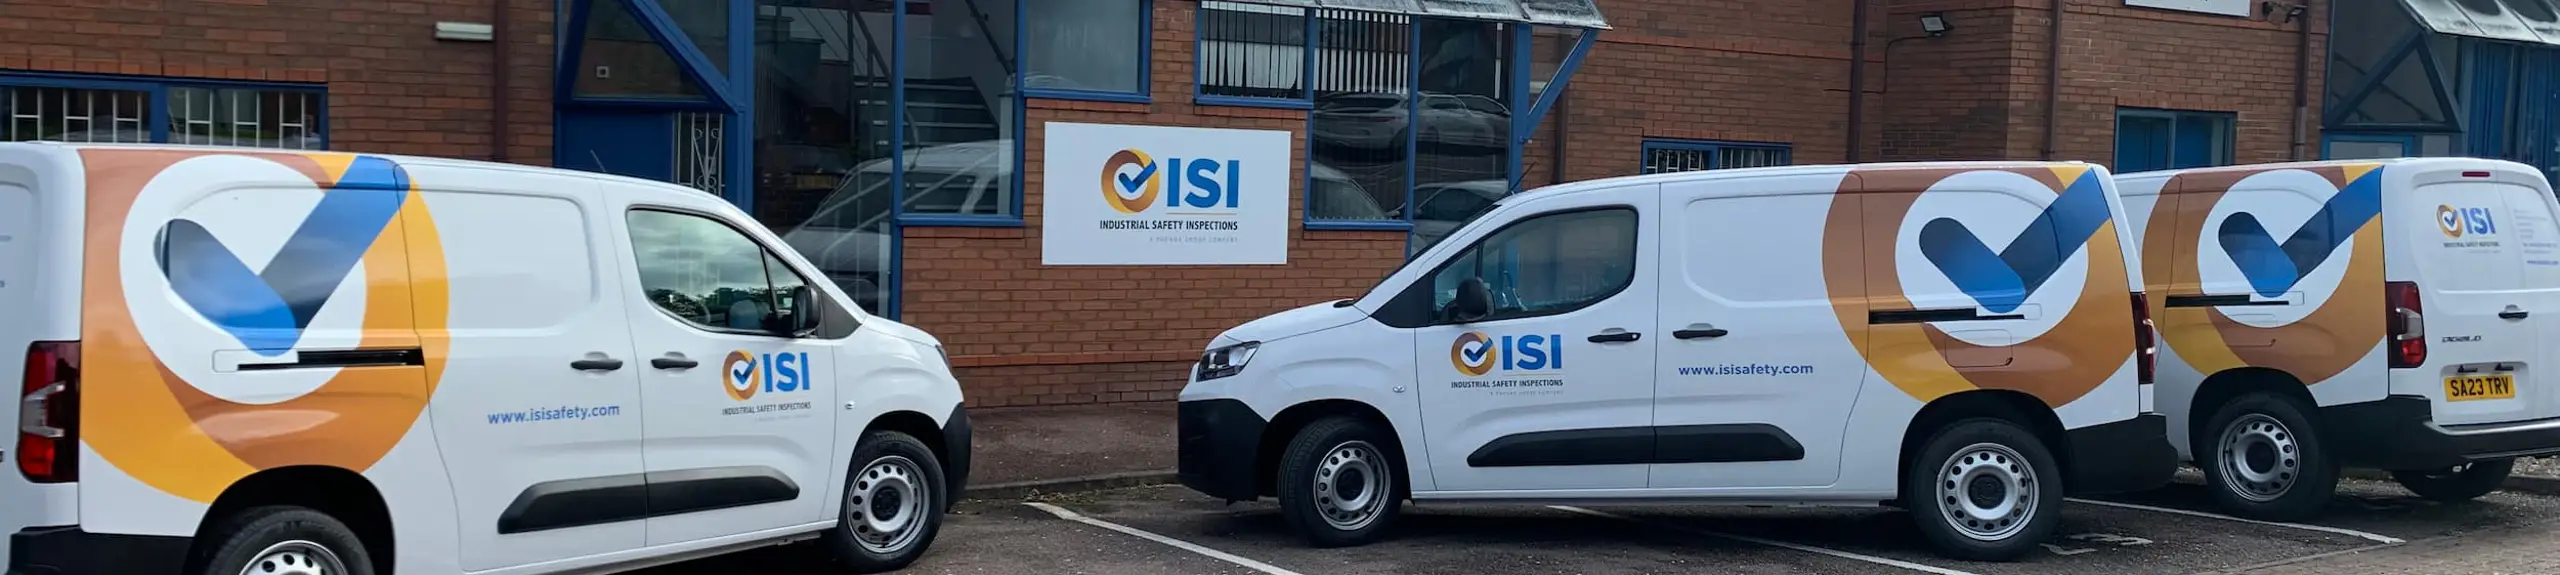 3 branded ISI vans parked outside office buildings